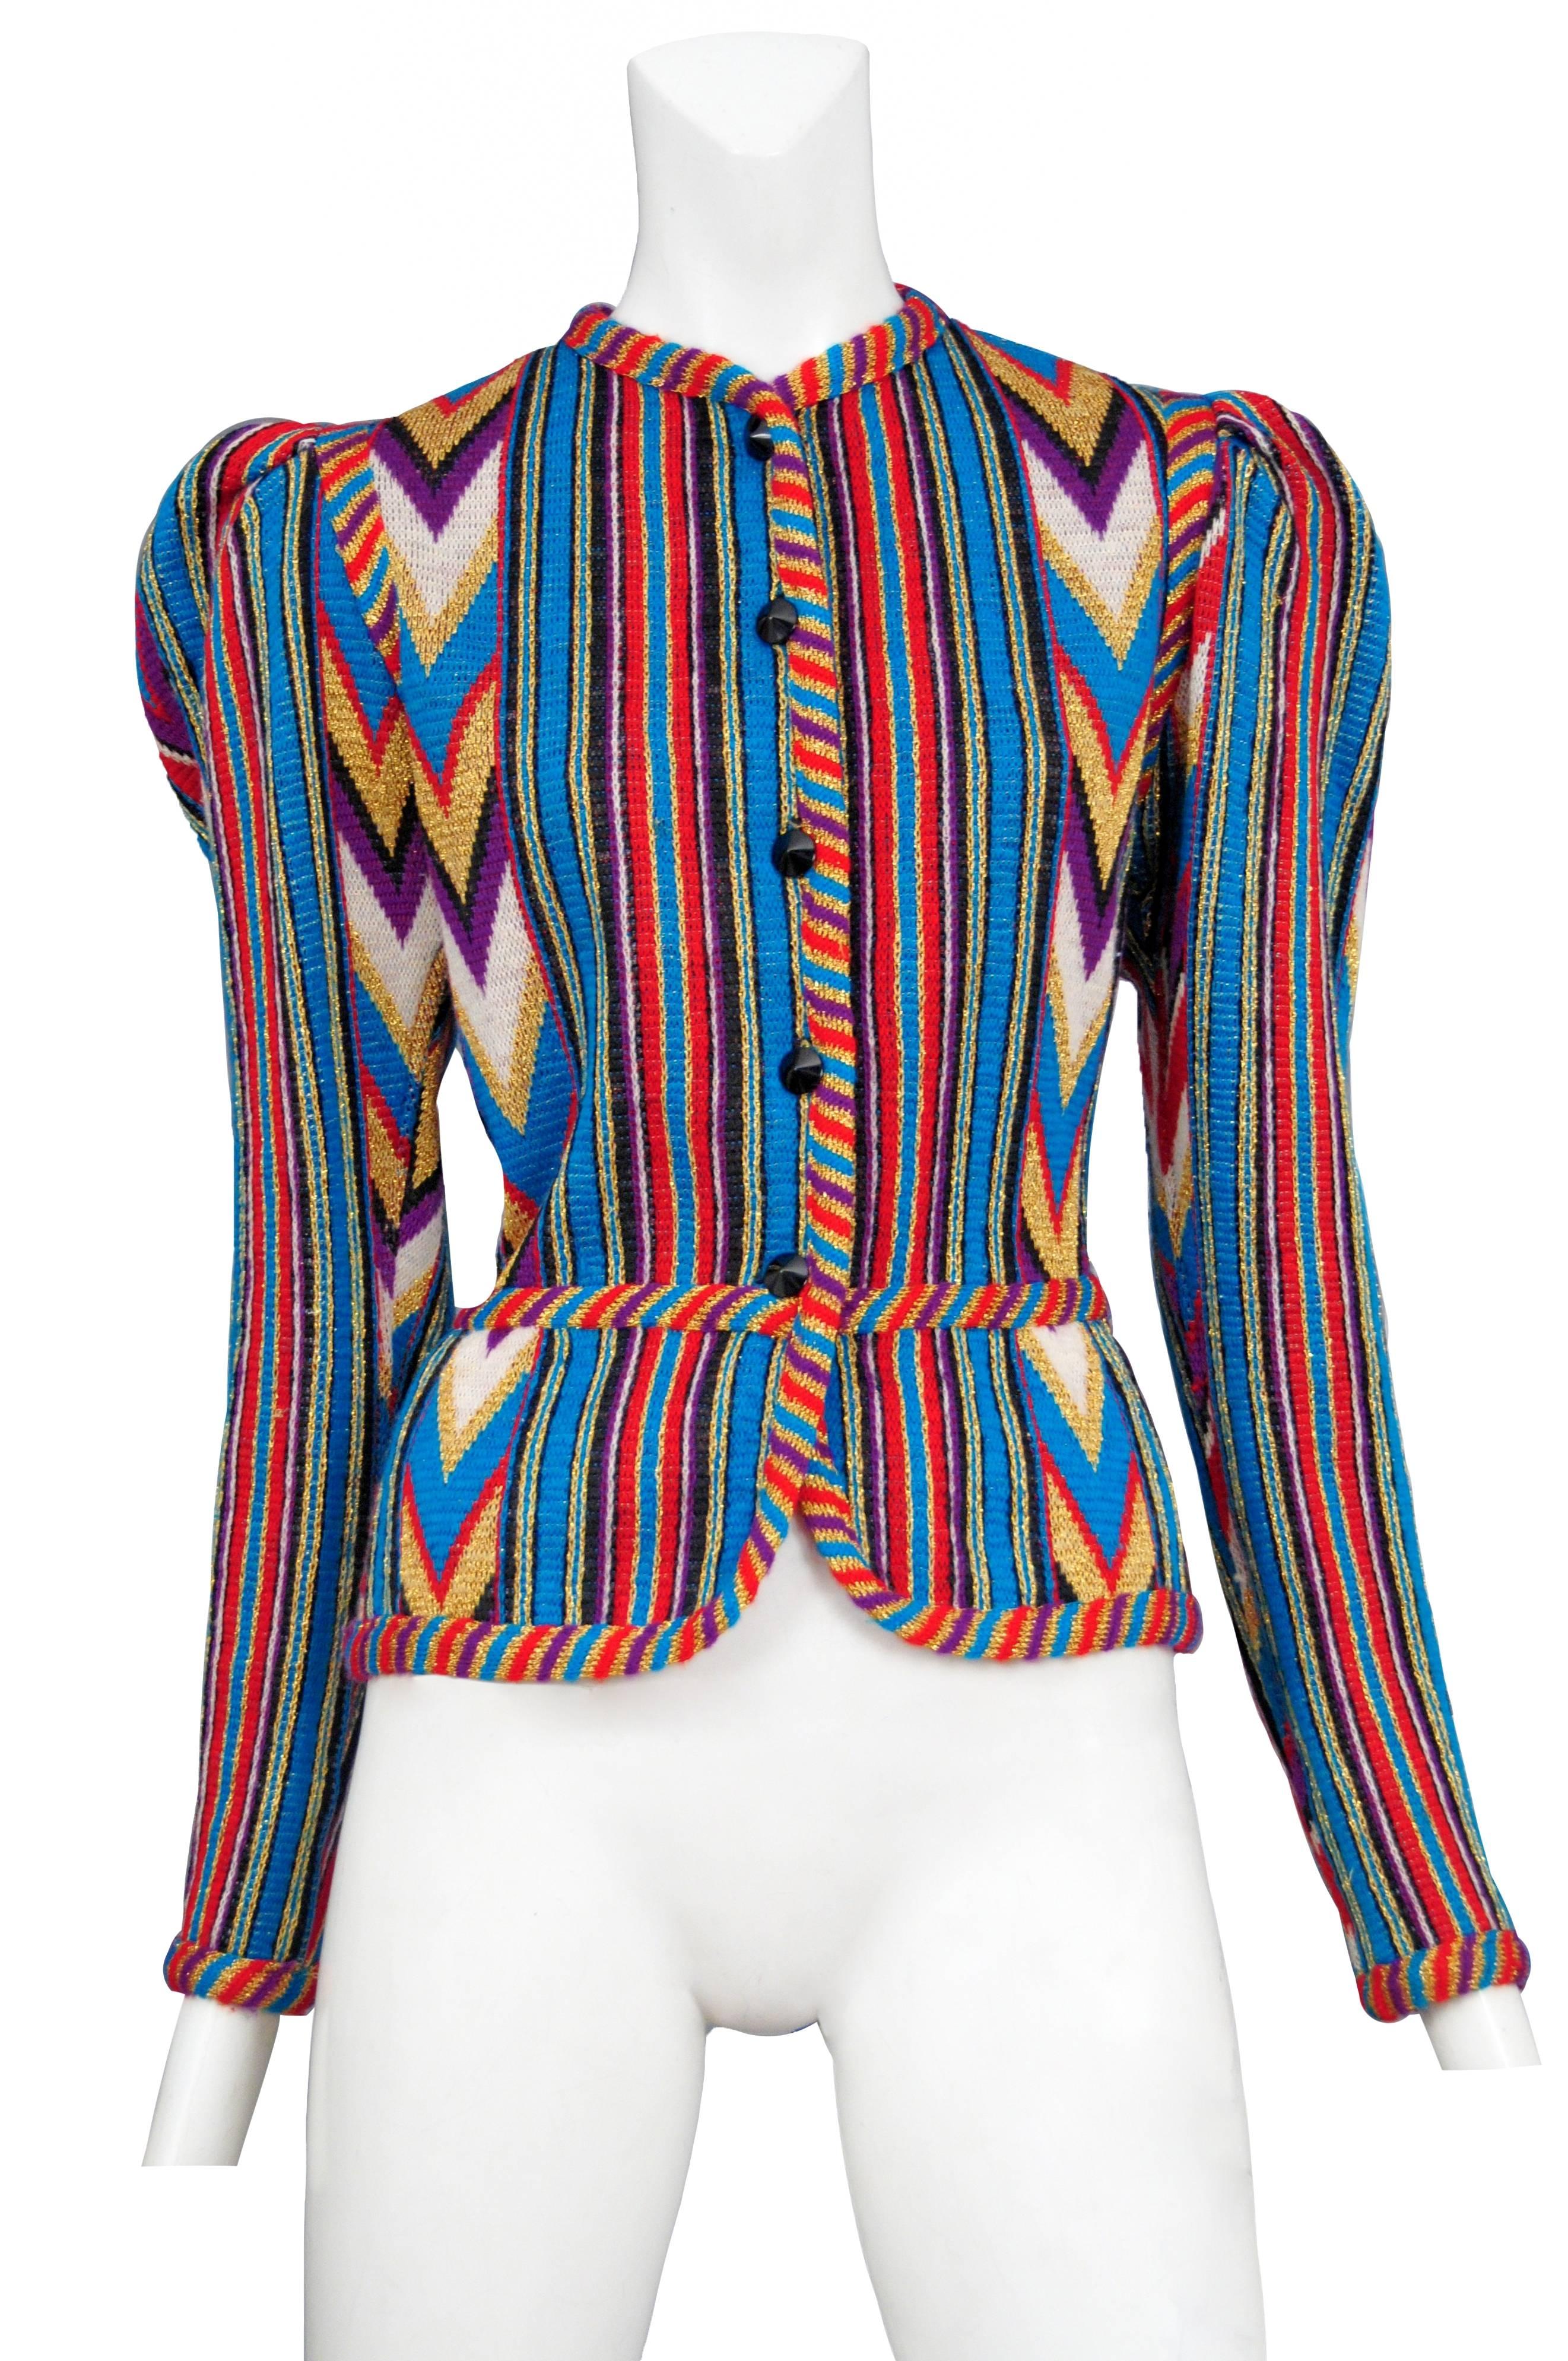 Vintage Yves Saint Laurent button front sweater featuring a Southwestern Navajo style pattern using metallic gold, purple, blue, red and white wool yarn, black buttons along the front closure, gathering at the shoulder seams and braided trim along